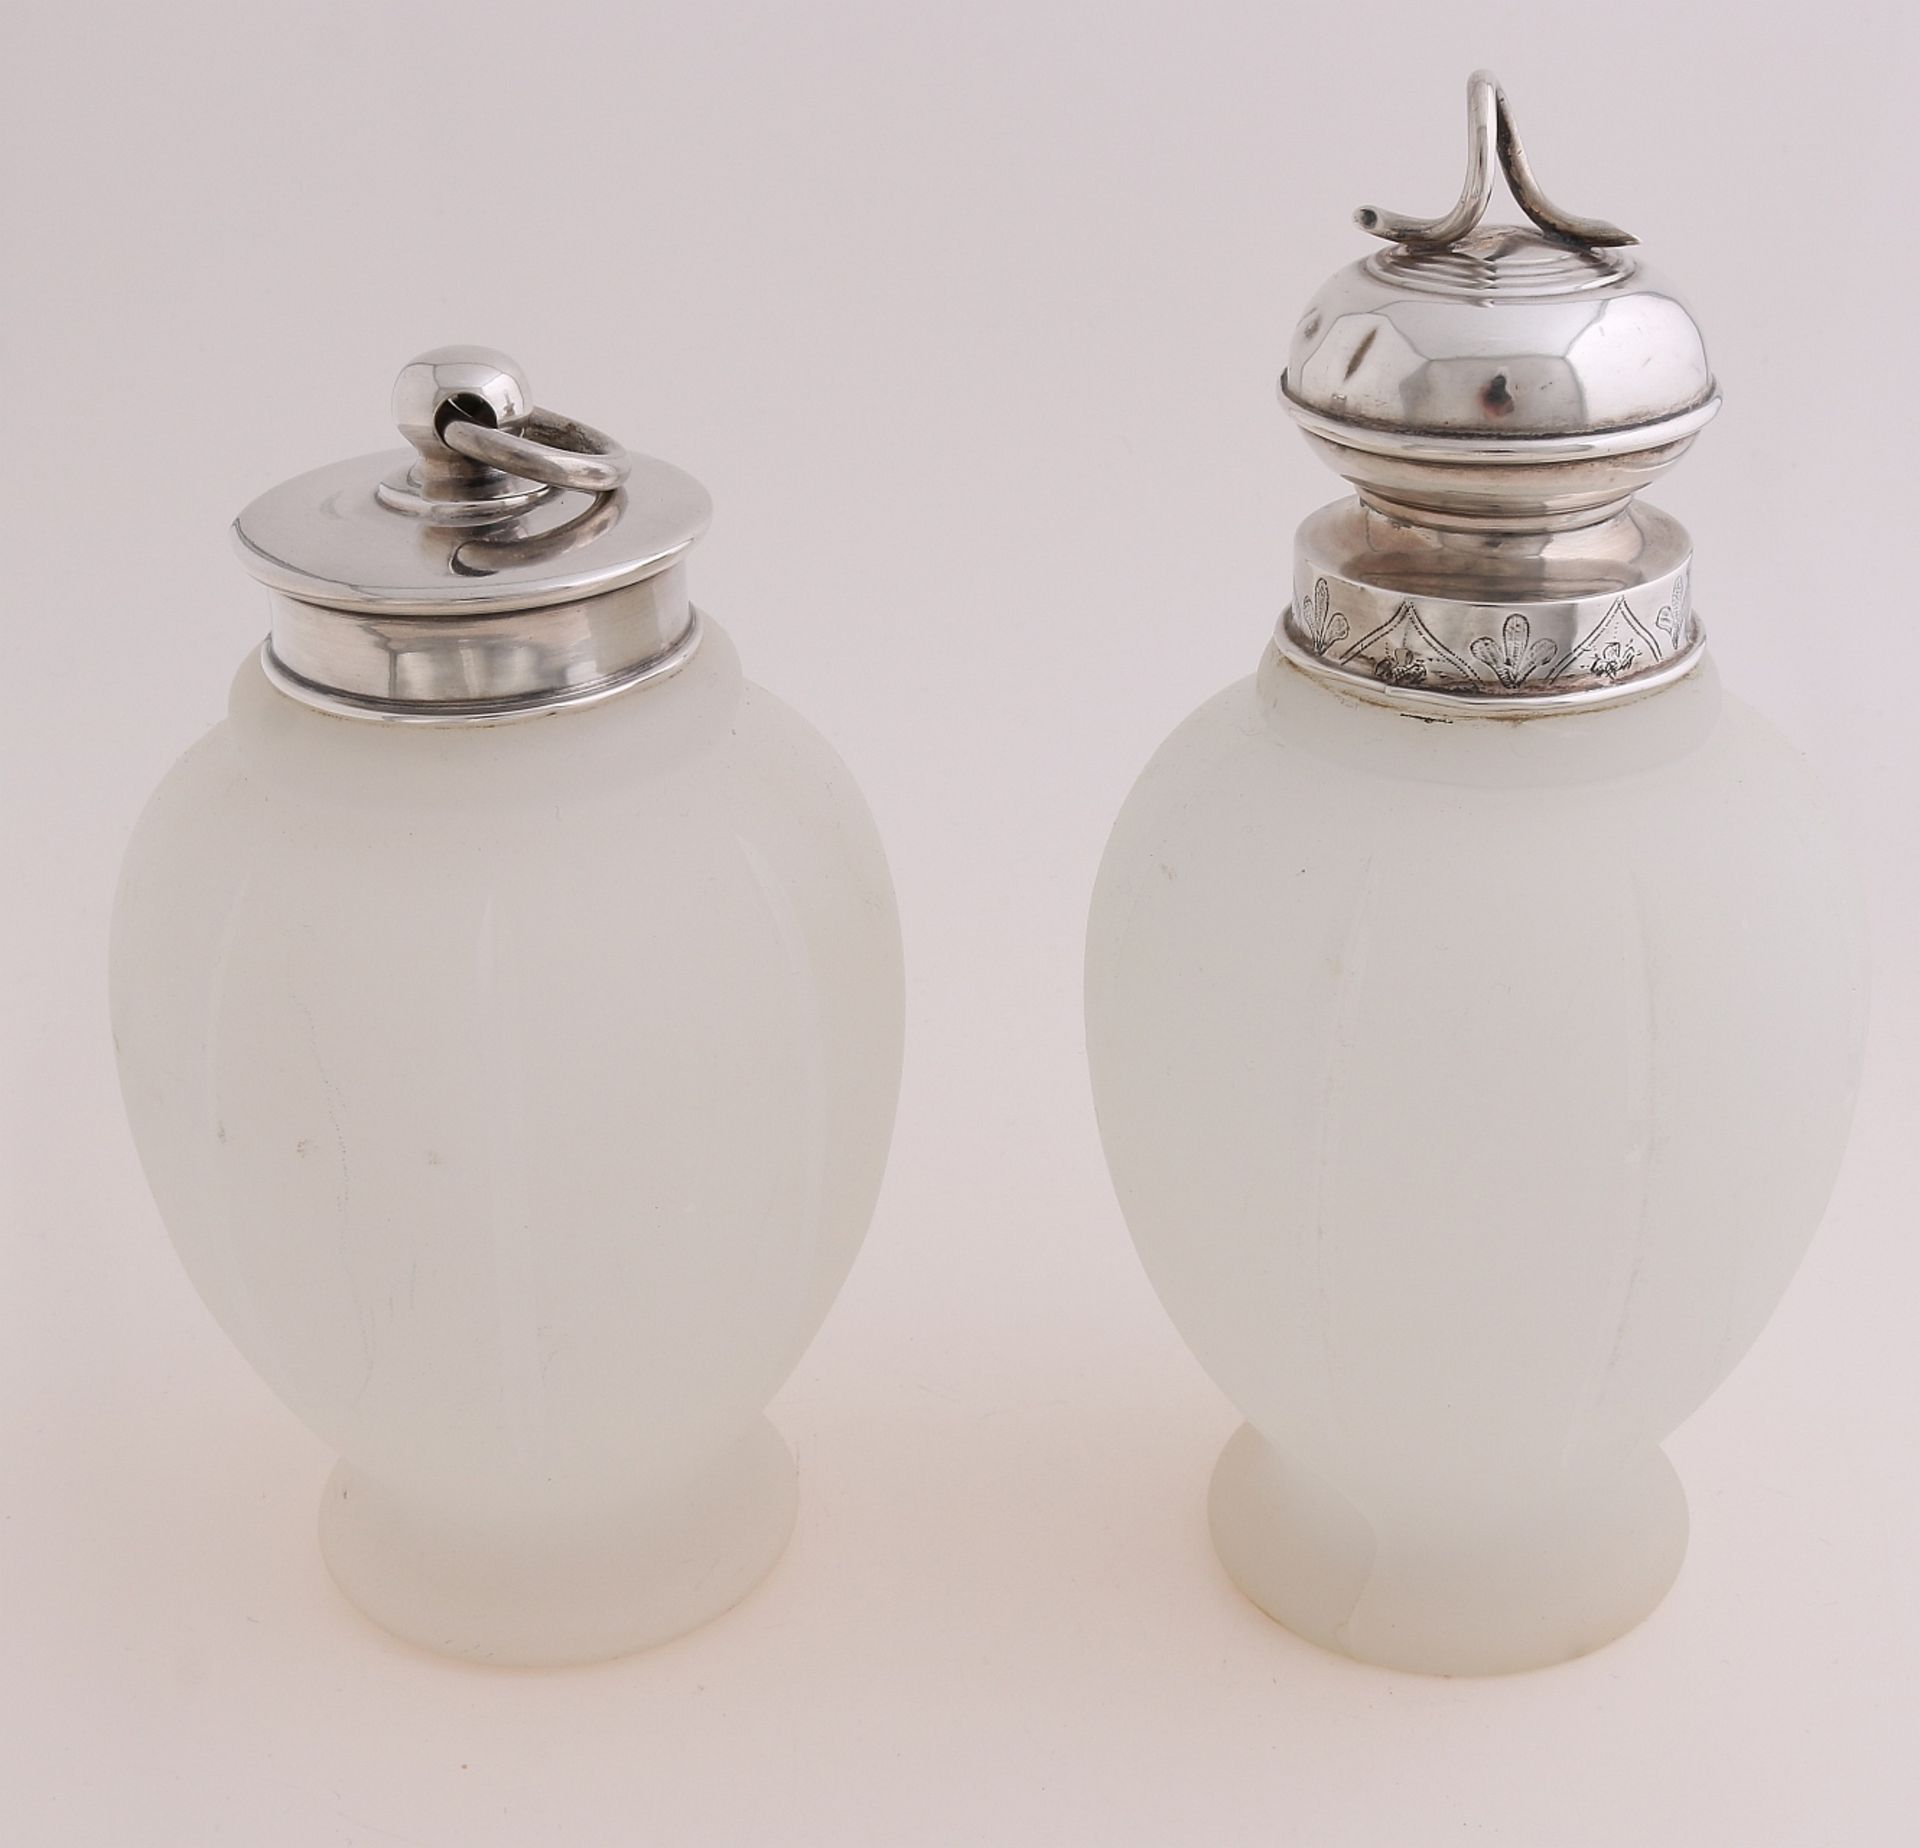 Two tea canisters with silver caps